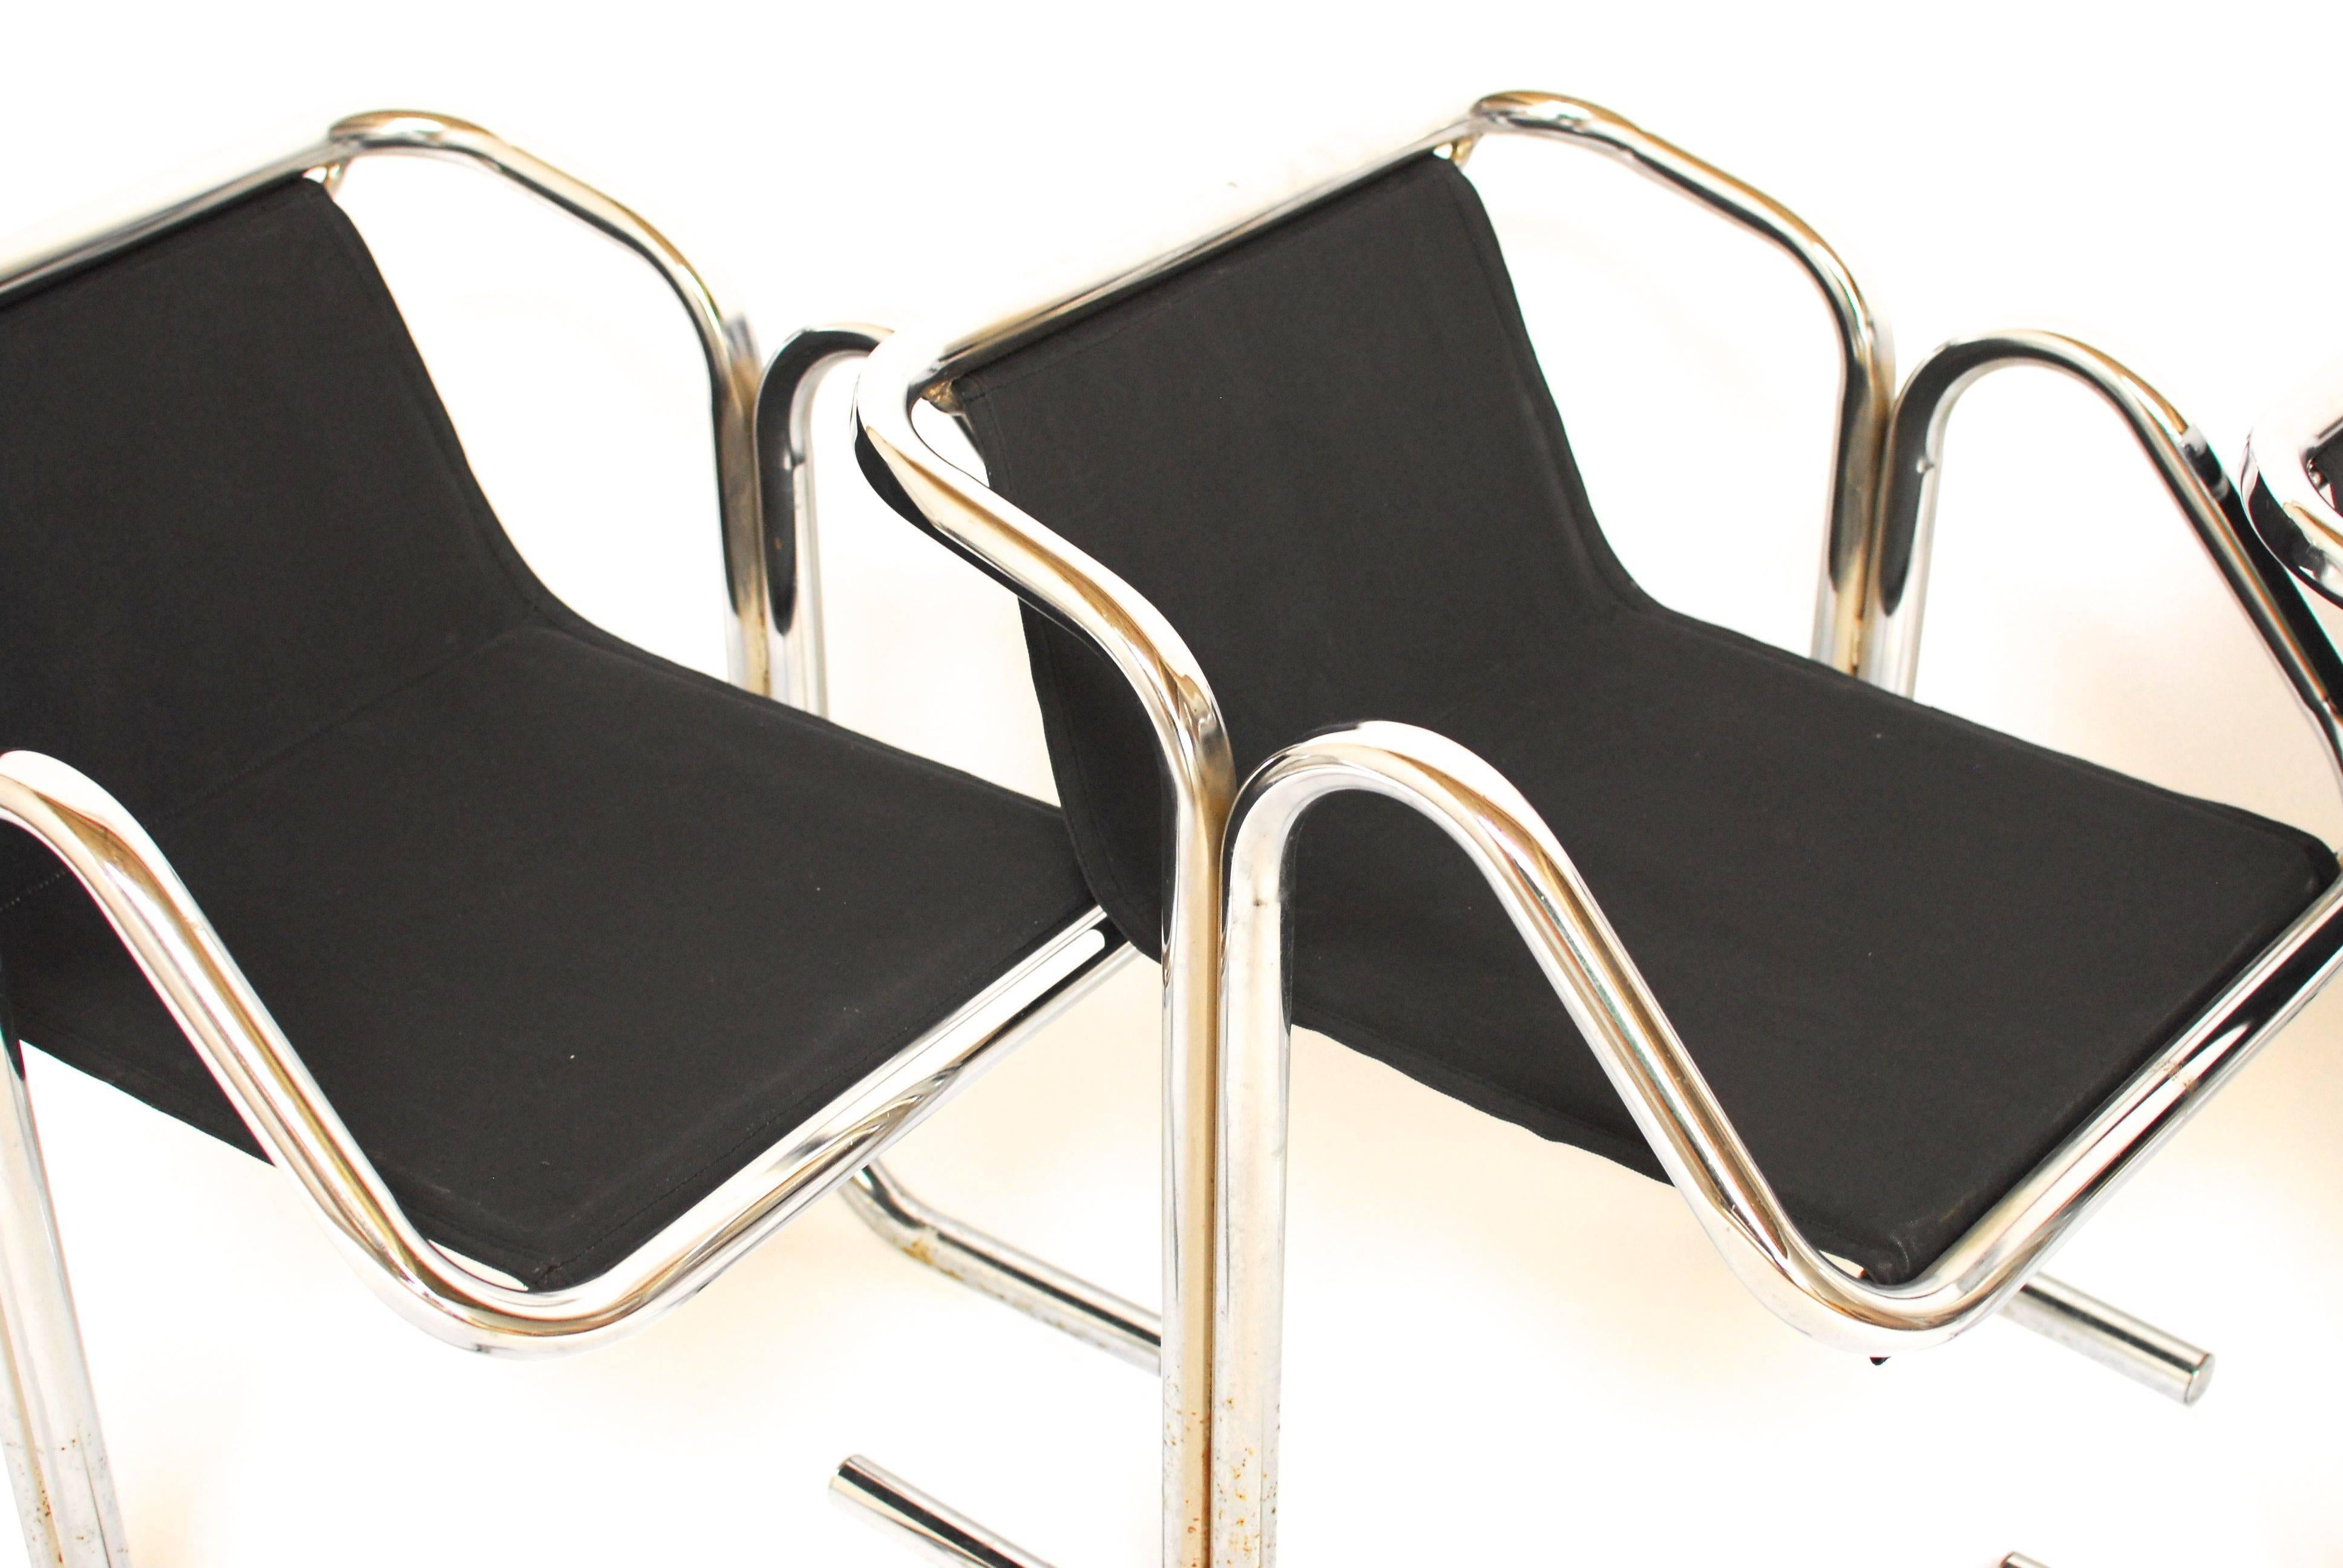 A set of Jerry Johnson Arcadia for Landes Manufacturing Company lounge chairs with chrome frames and black canvas slings. Each chair is made from two bent chrome tubes fused together. The slings on these chairs have just been replaced with new black